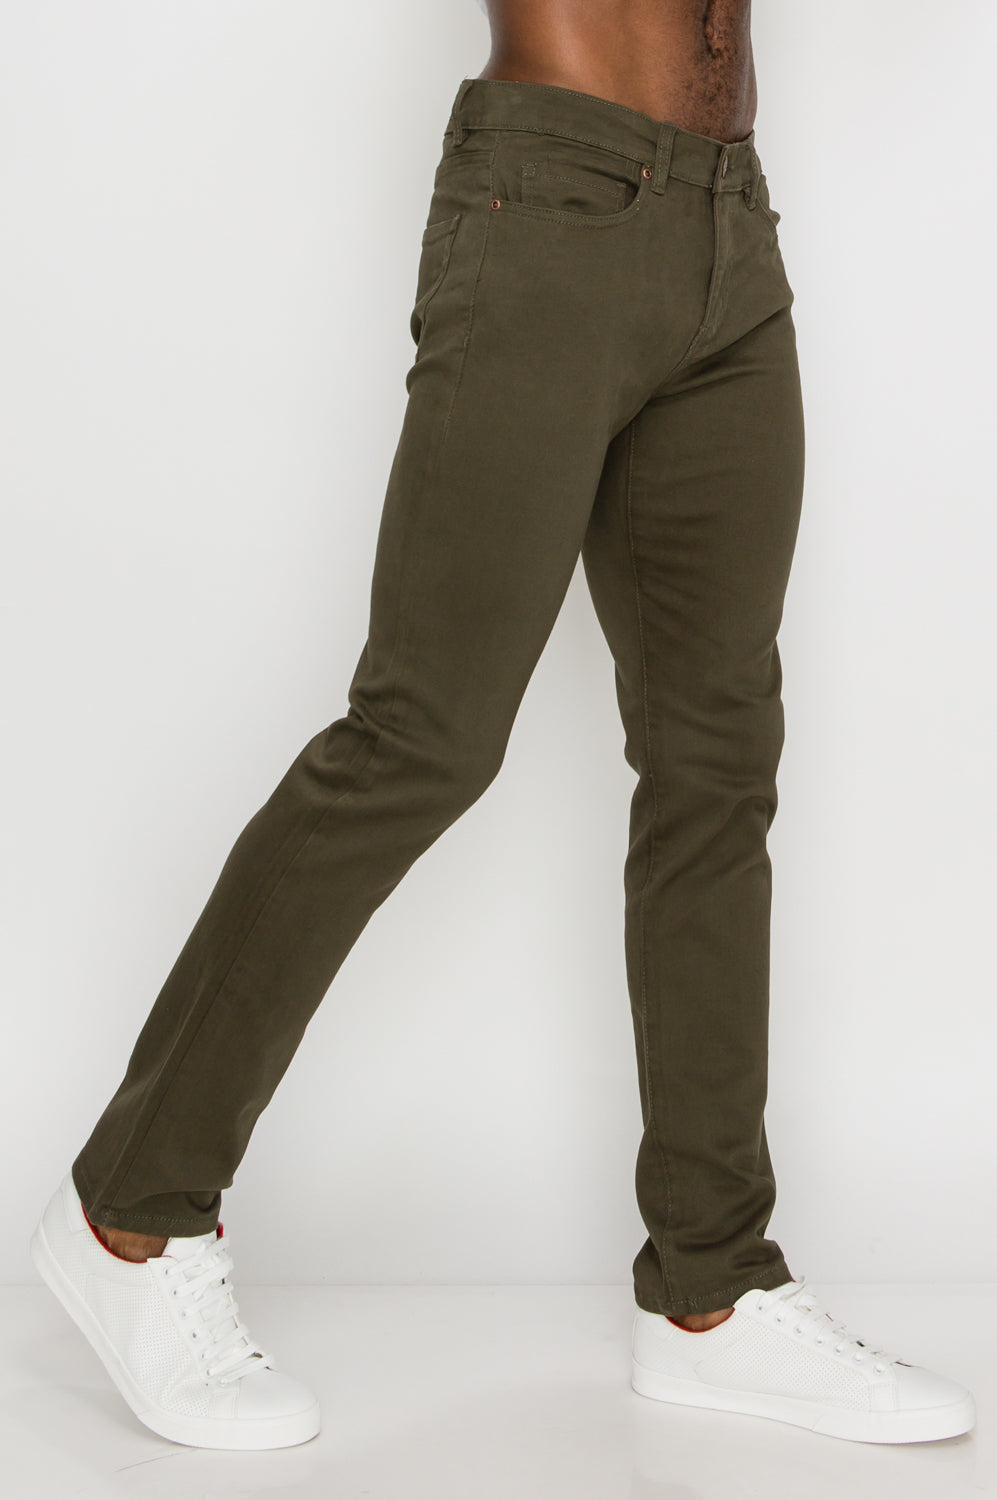 army green jeans mens